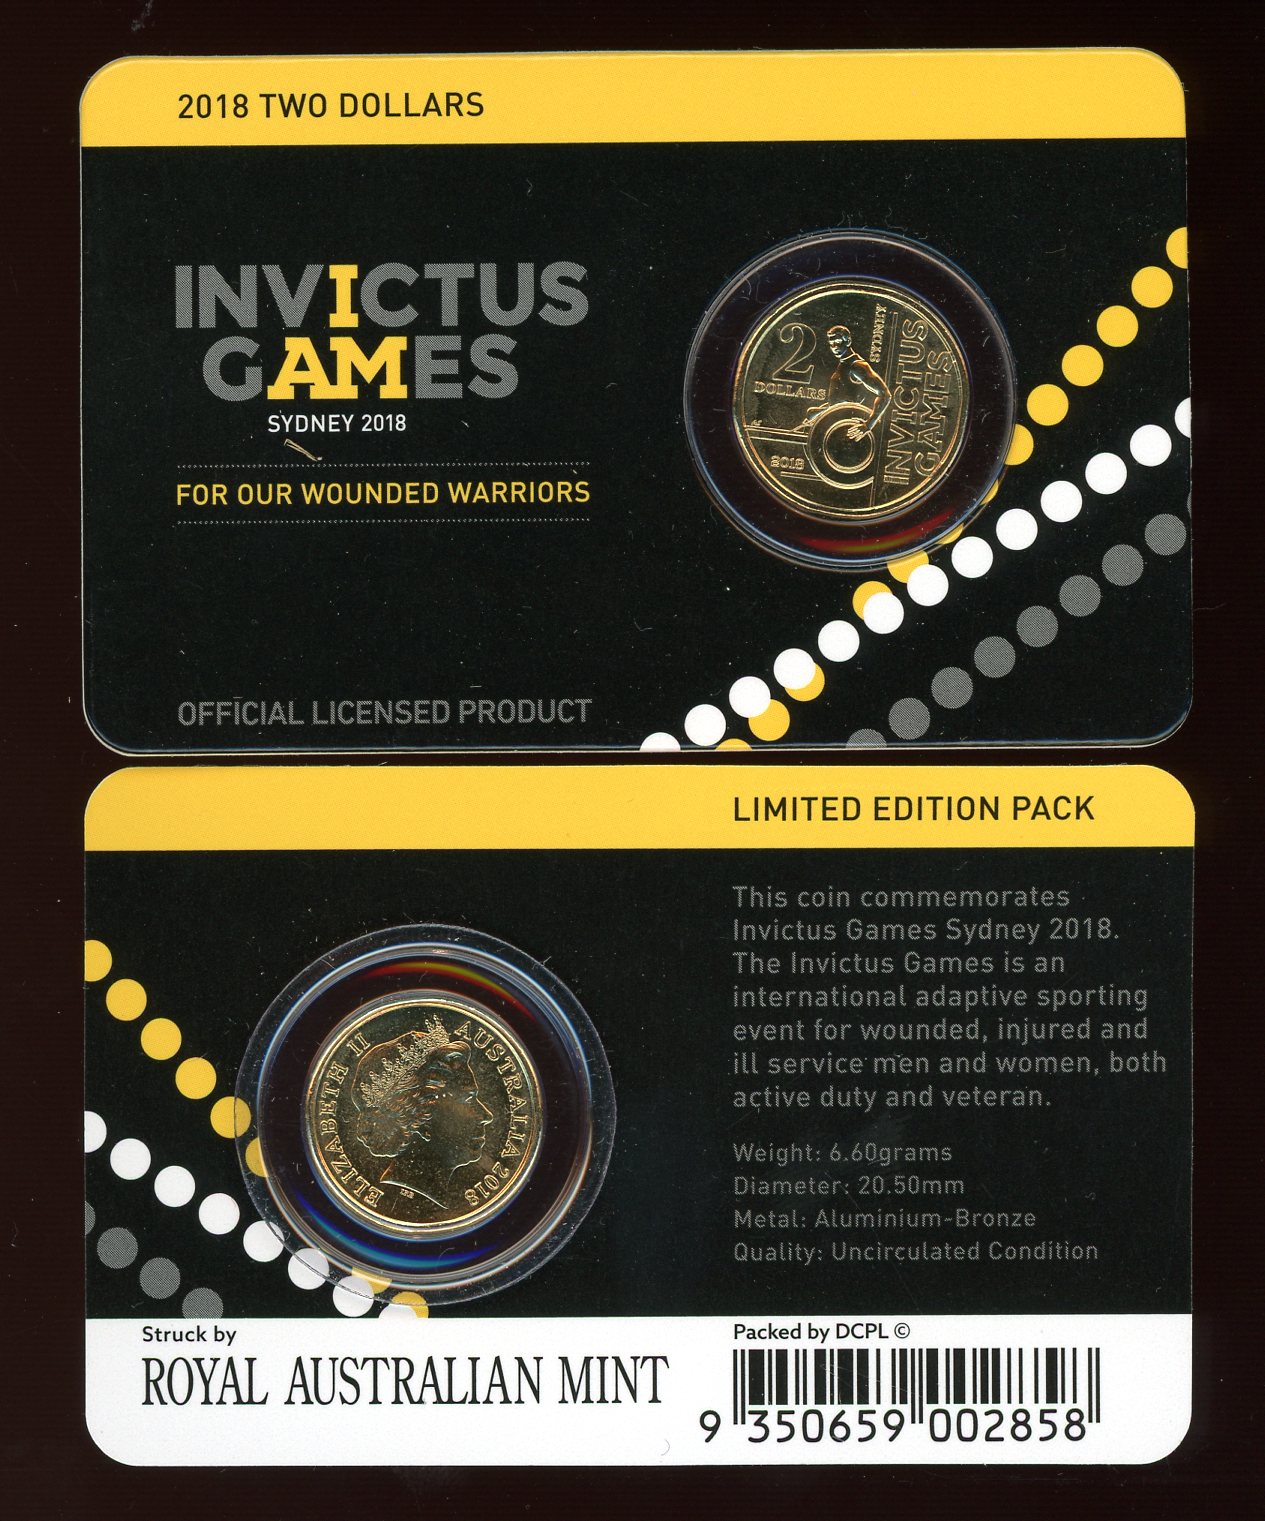 Thumbnail for 2018 Invictus Games $2.00 Coin on DCPL Card